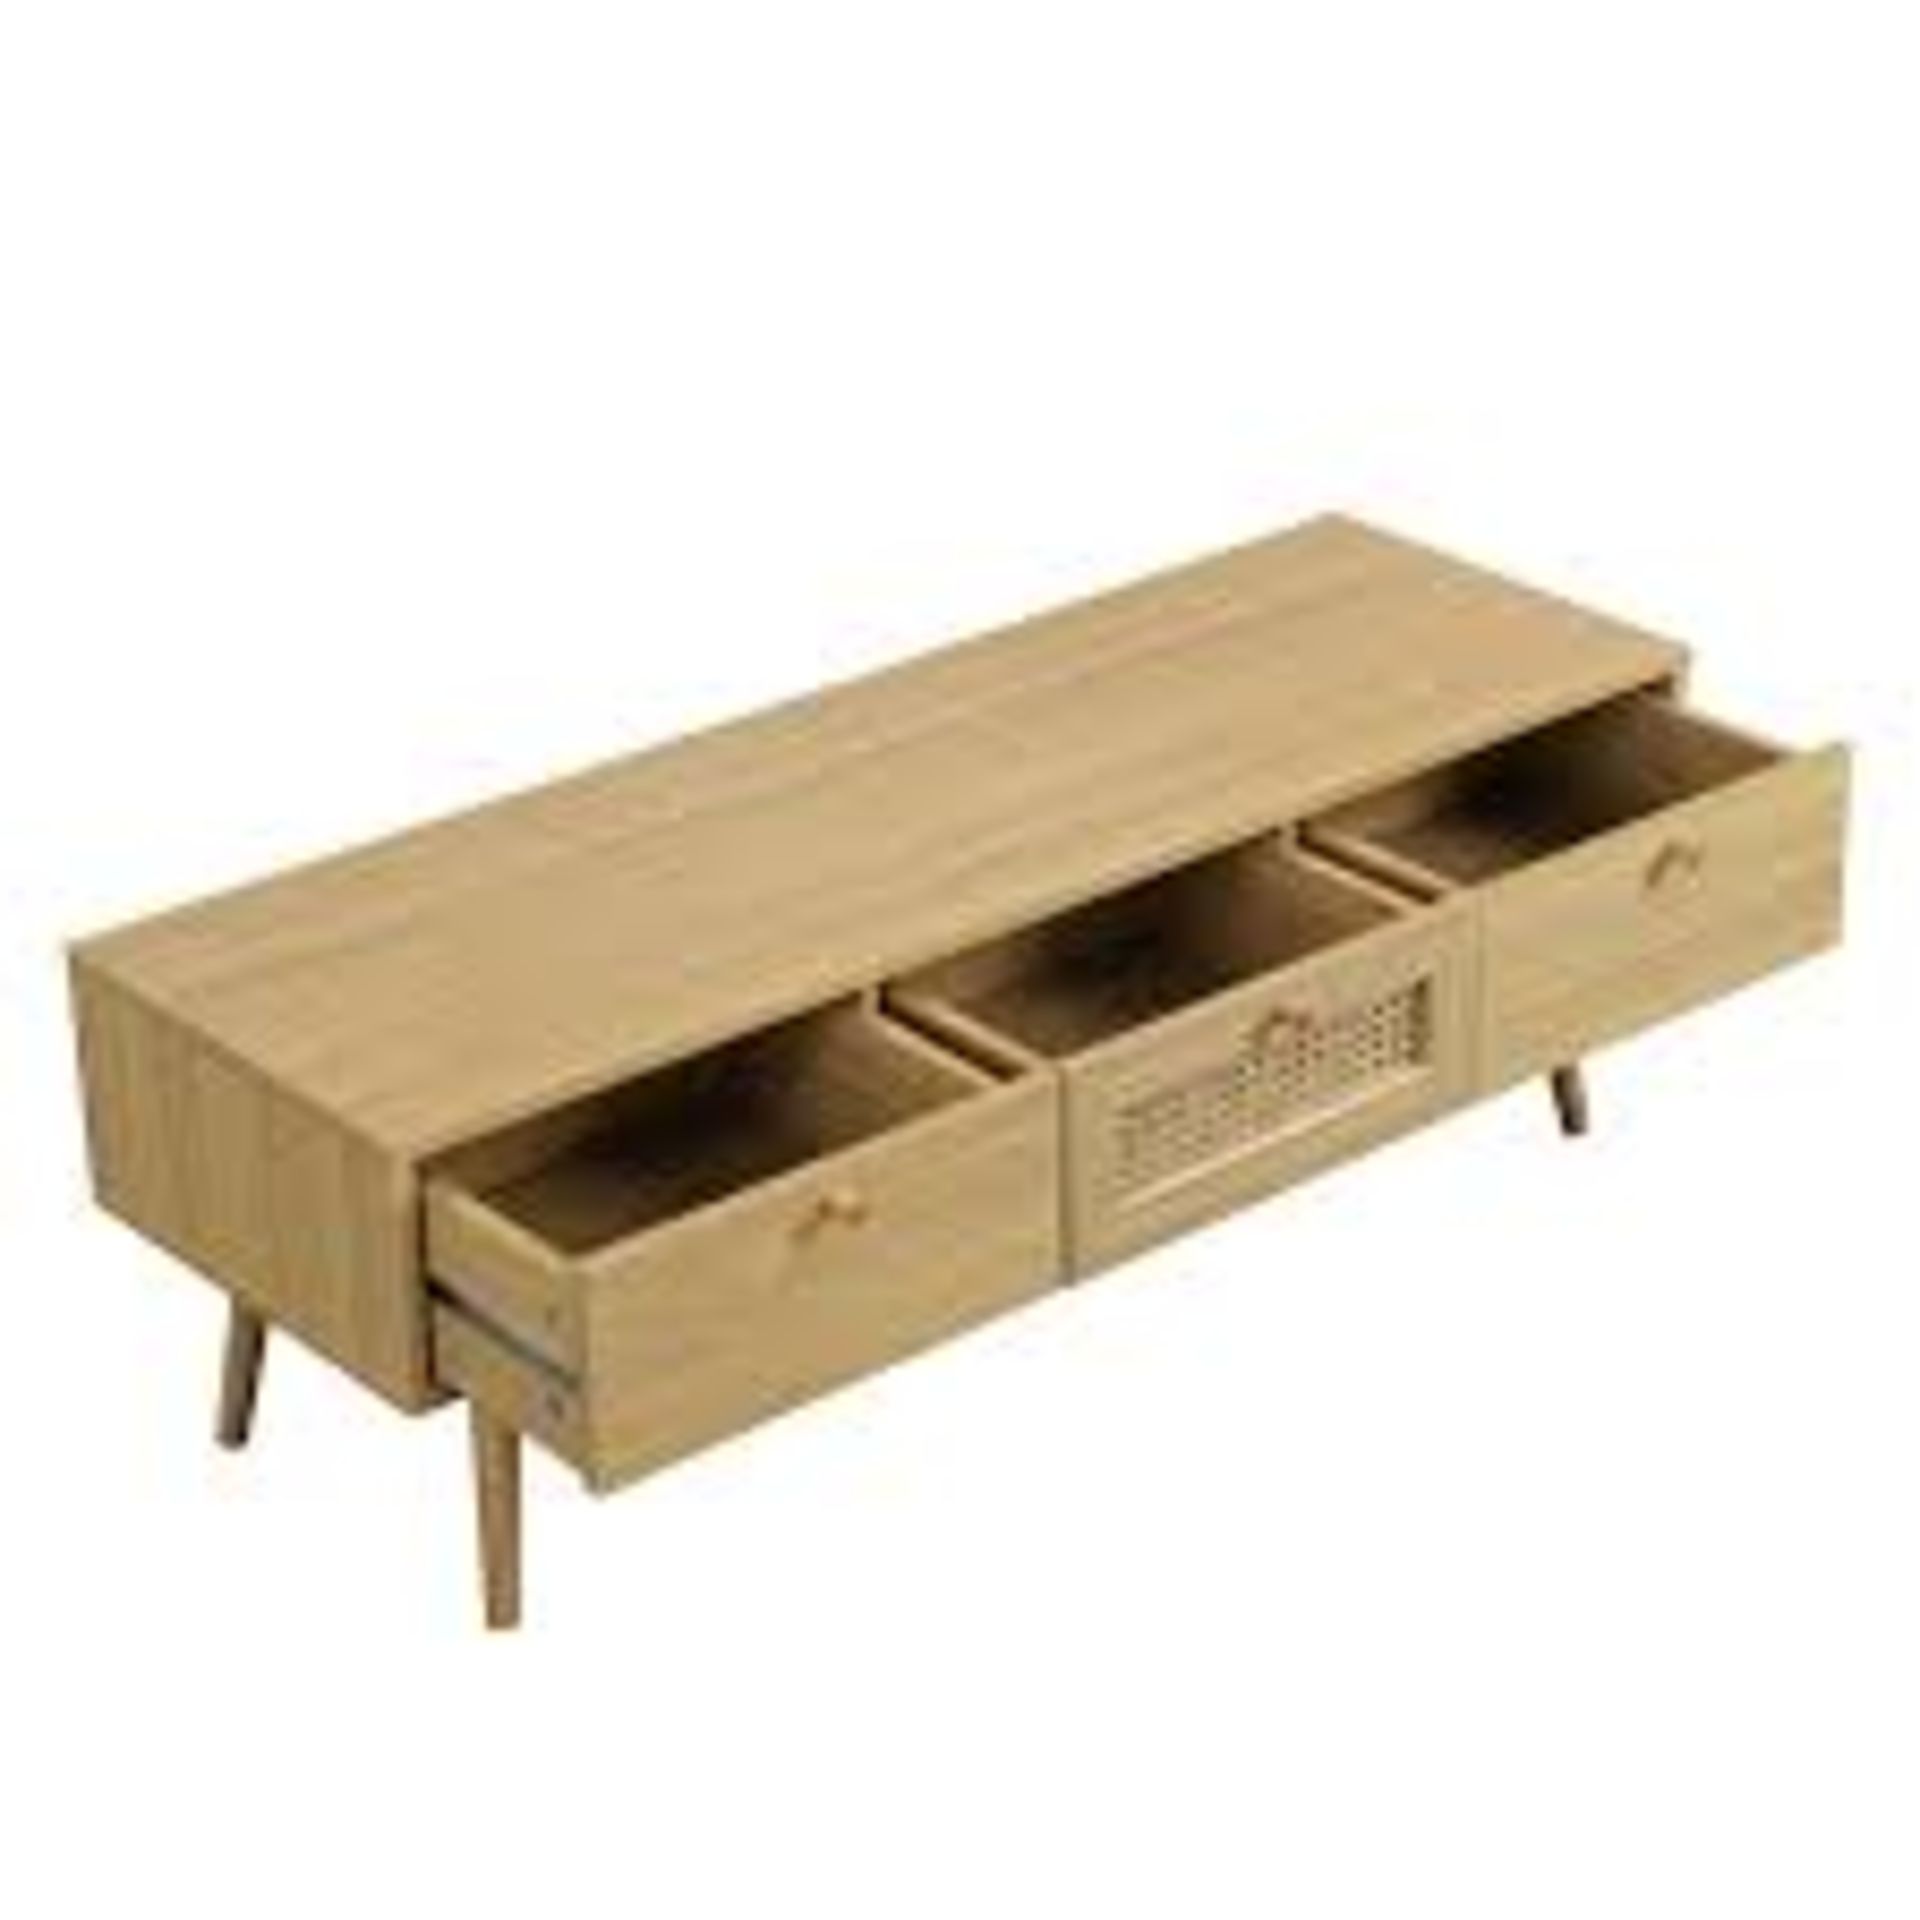 Anya Woven Rattan 3-Drawer TV Unit in Natural. - SR6. - Image 2 of 2